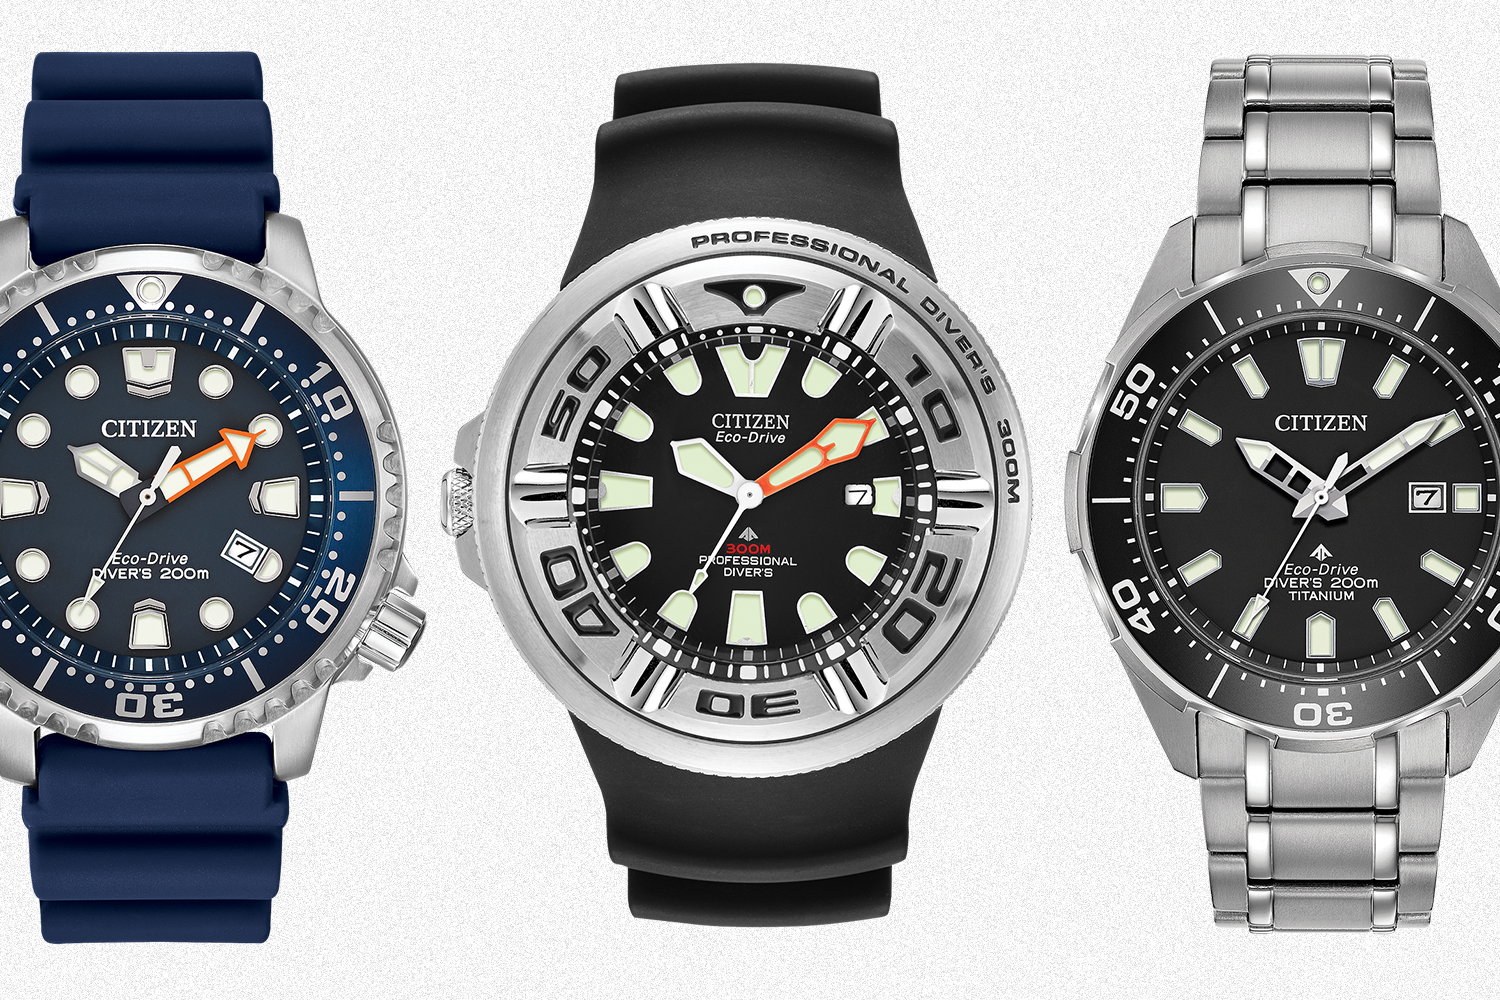 Three different men's dive watches from Citizen